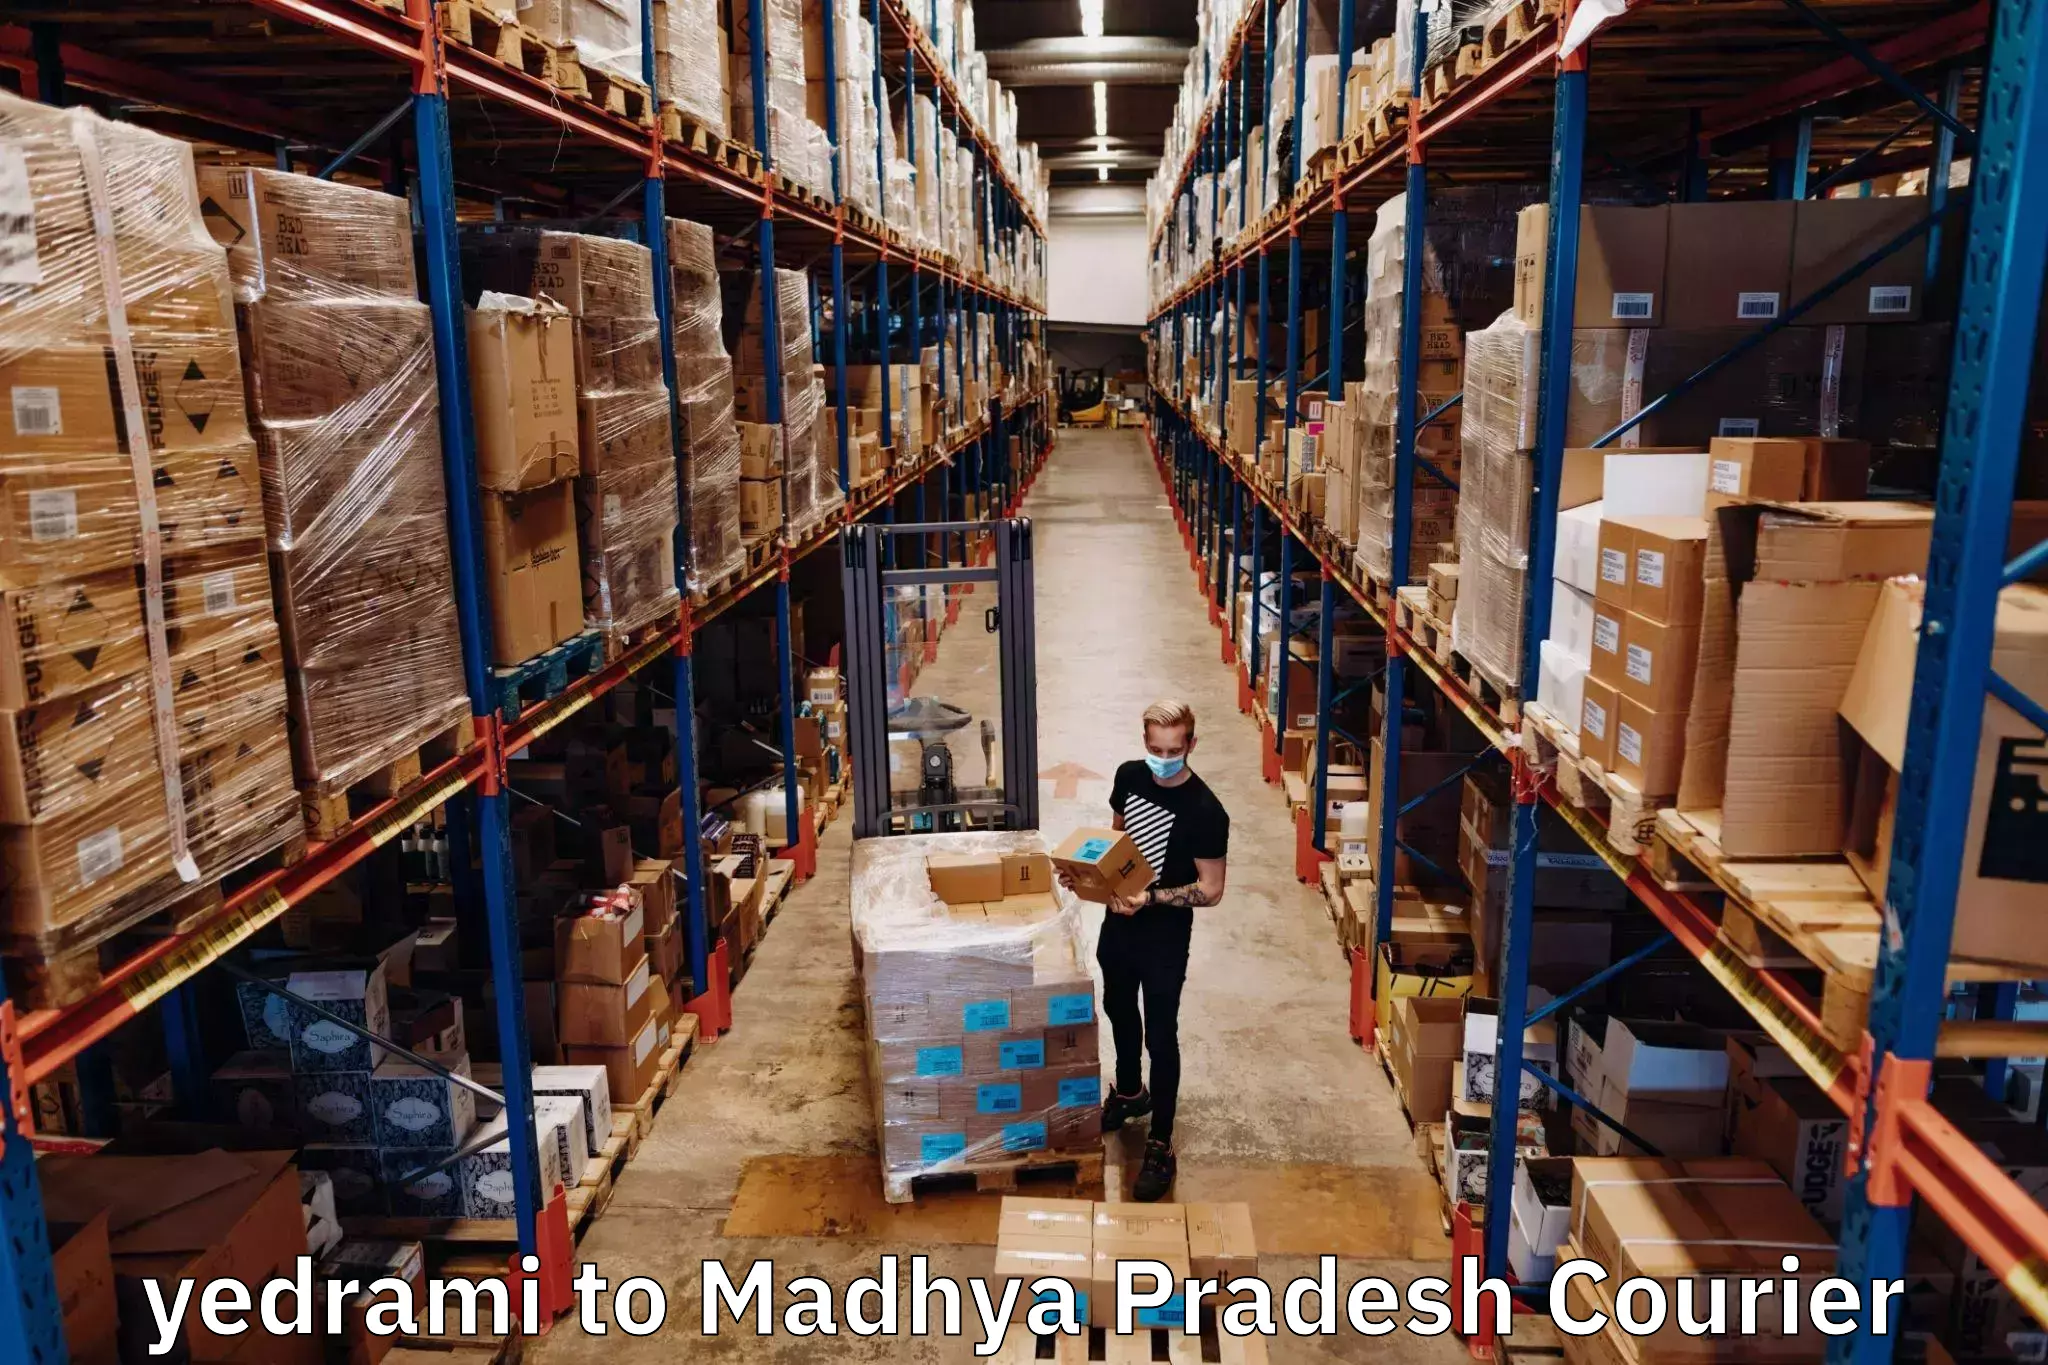 Courier dispatch services yedrami to IIT Indore